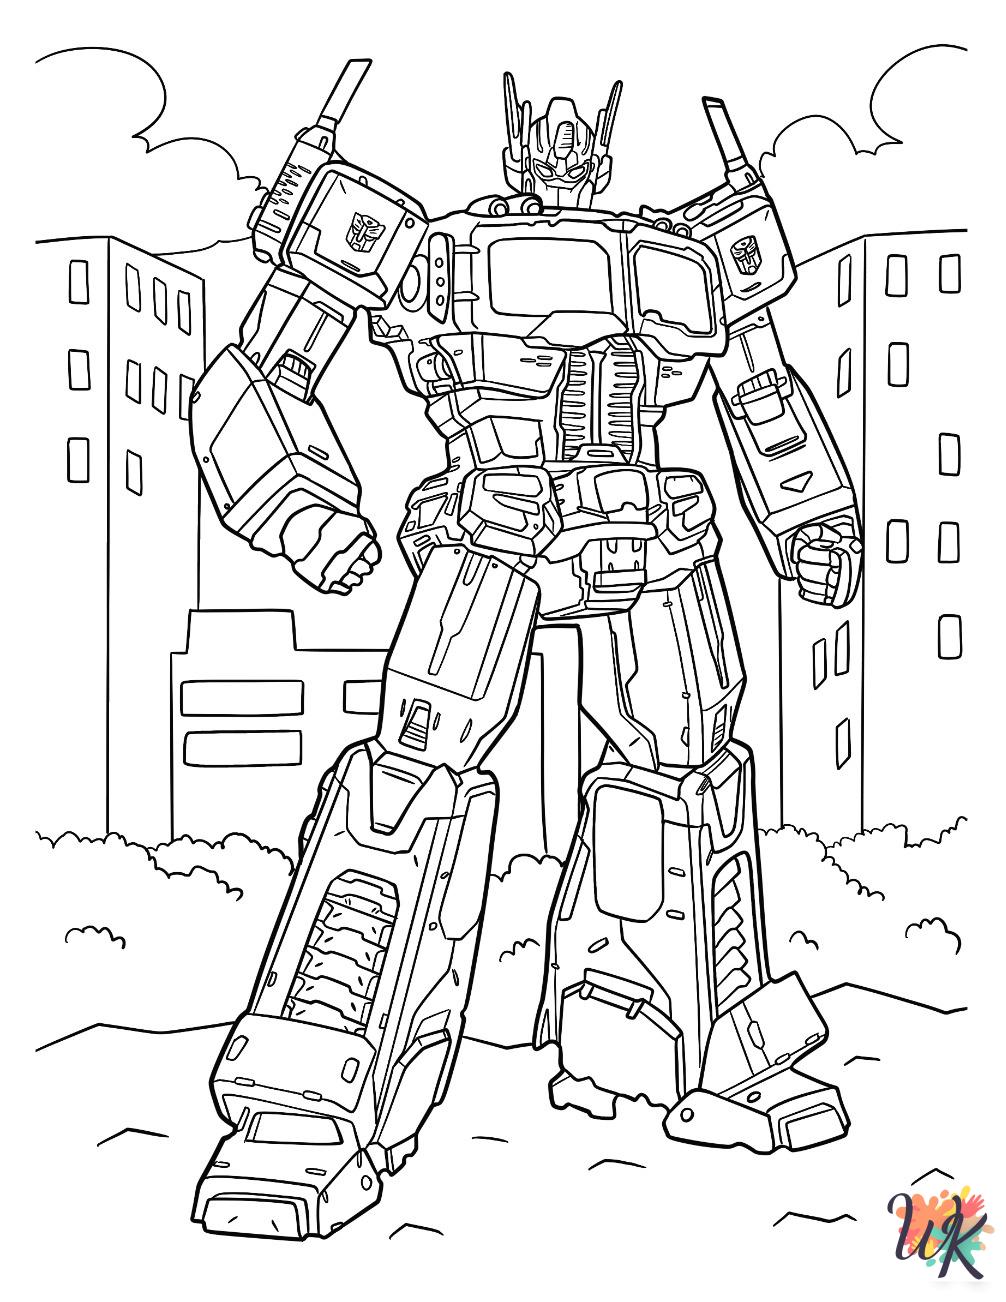 Optimus Prime coloring pages for adults